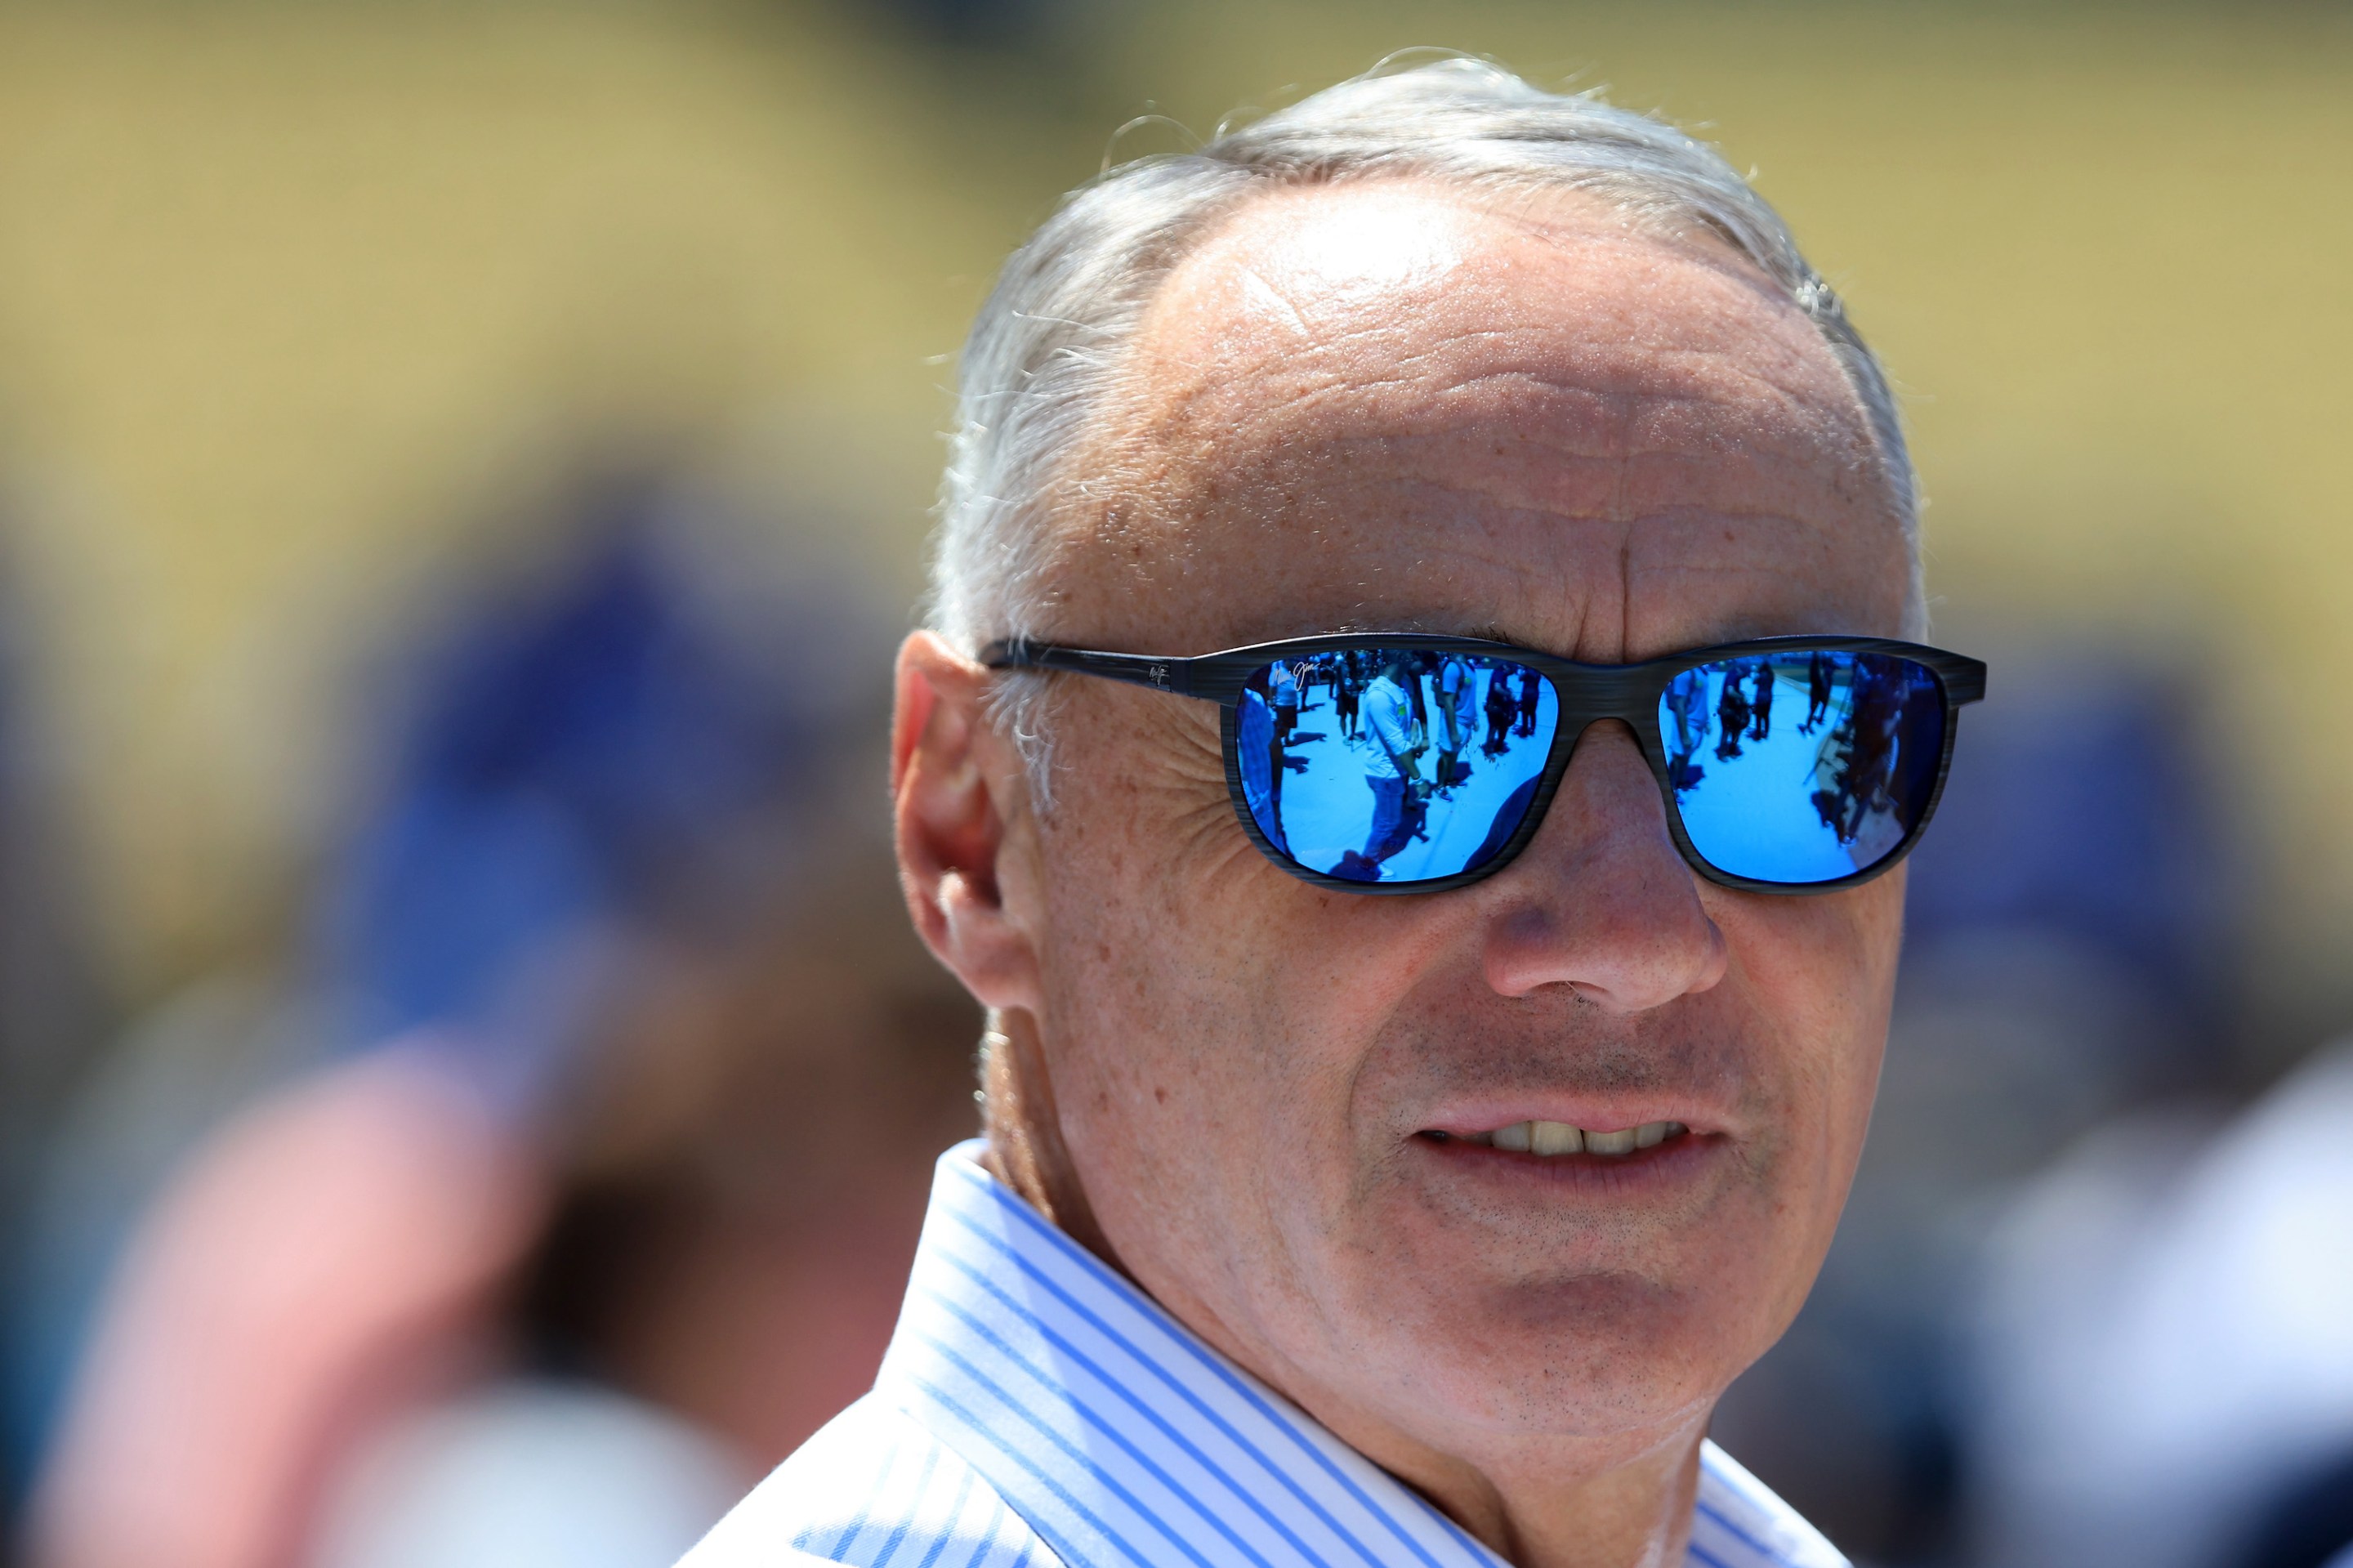 MLB Commissioner Rob Manfred, seen here wearing reflective sunglasses at the 2022 All-Star Game.